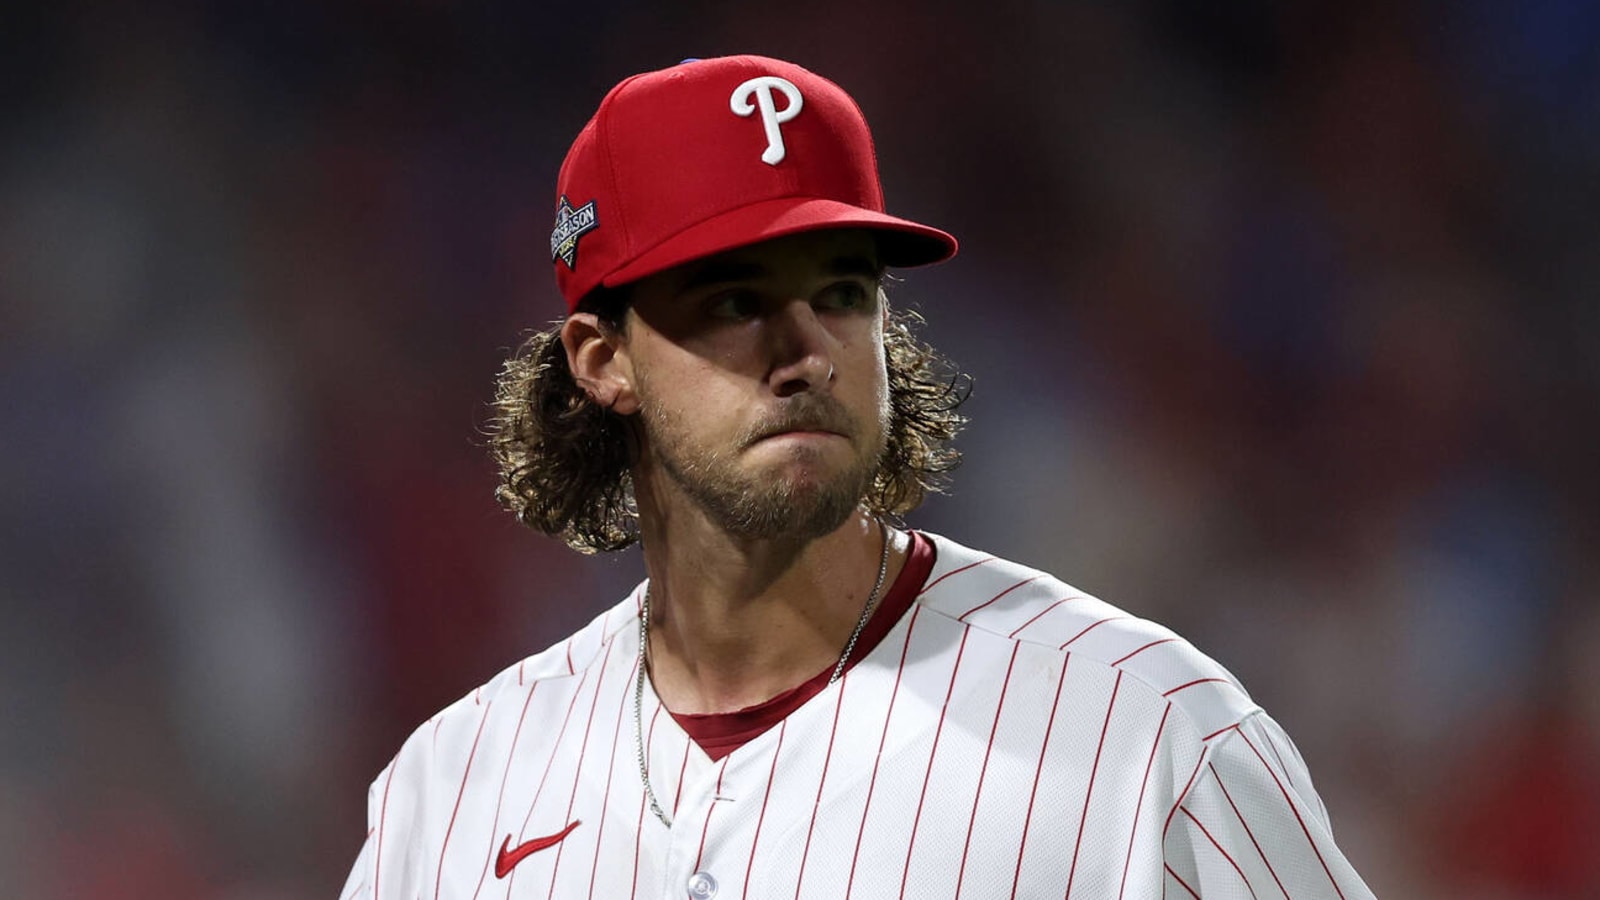 Phillies view re-signing this star as a priority